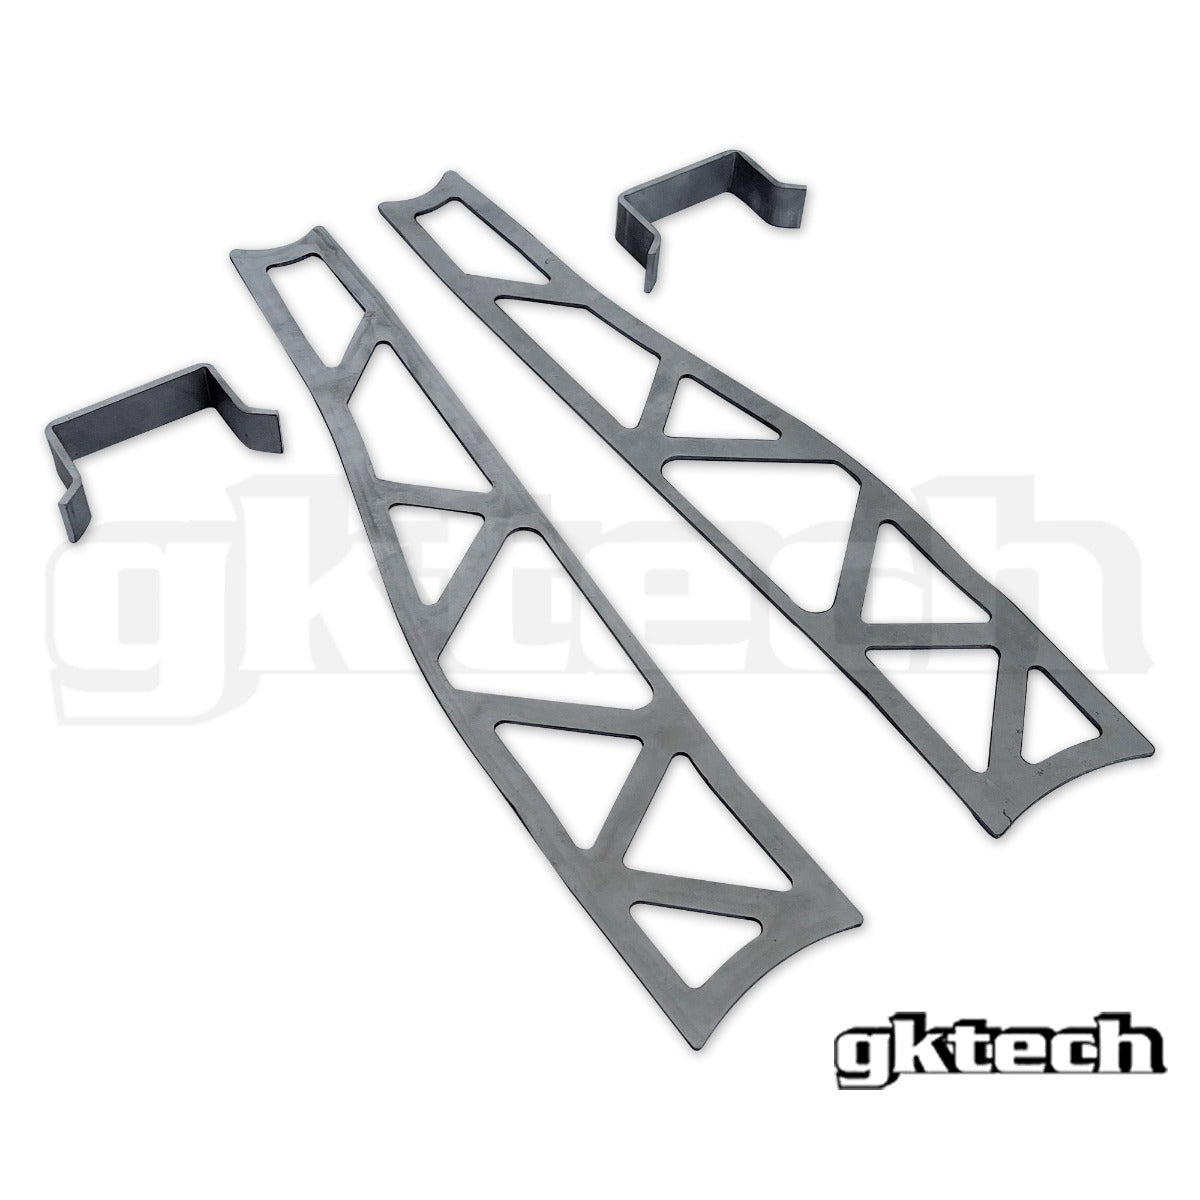 S/R chassis (RWD) Front LCA weld in reinforcement plates